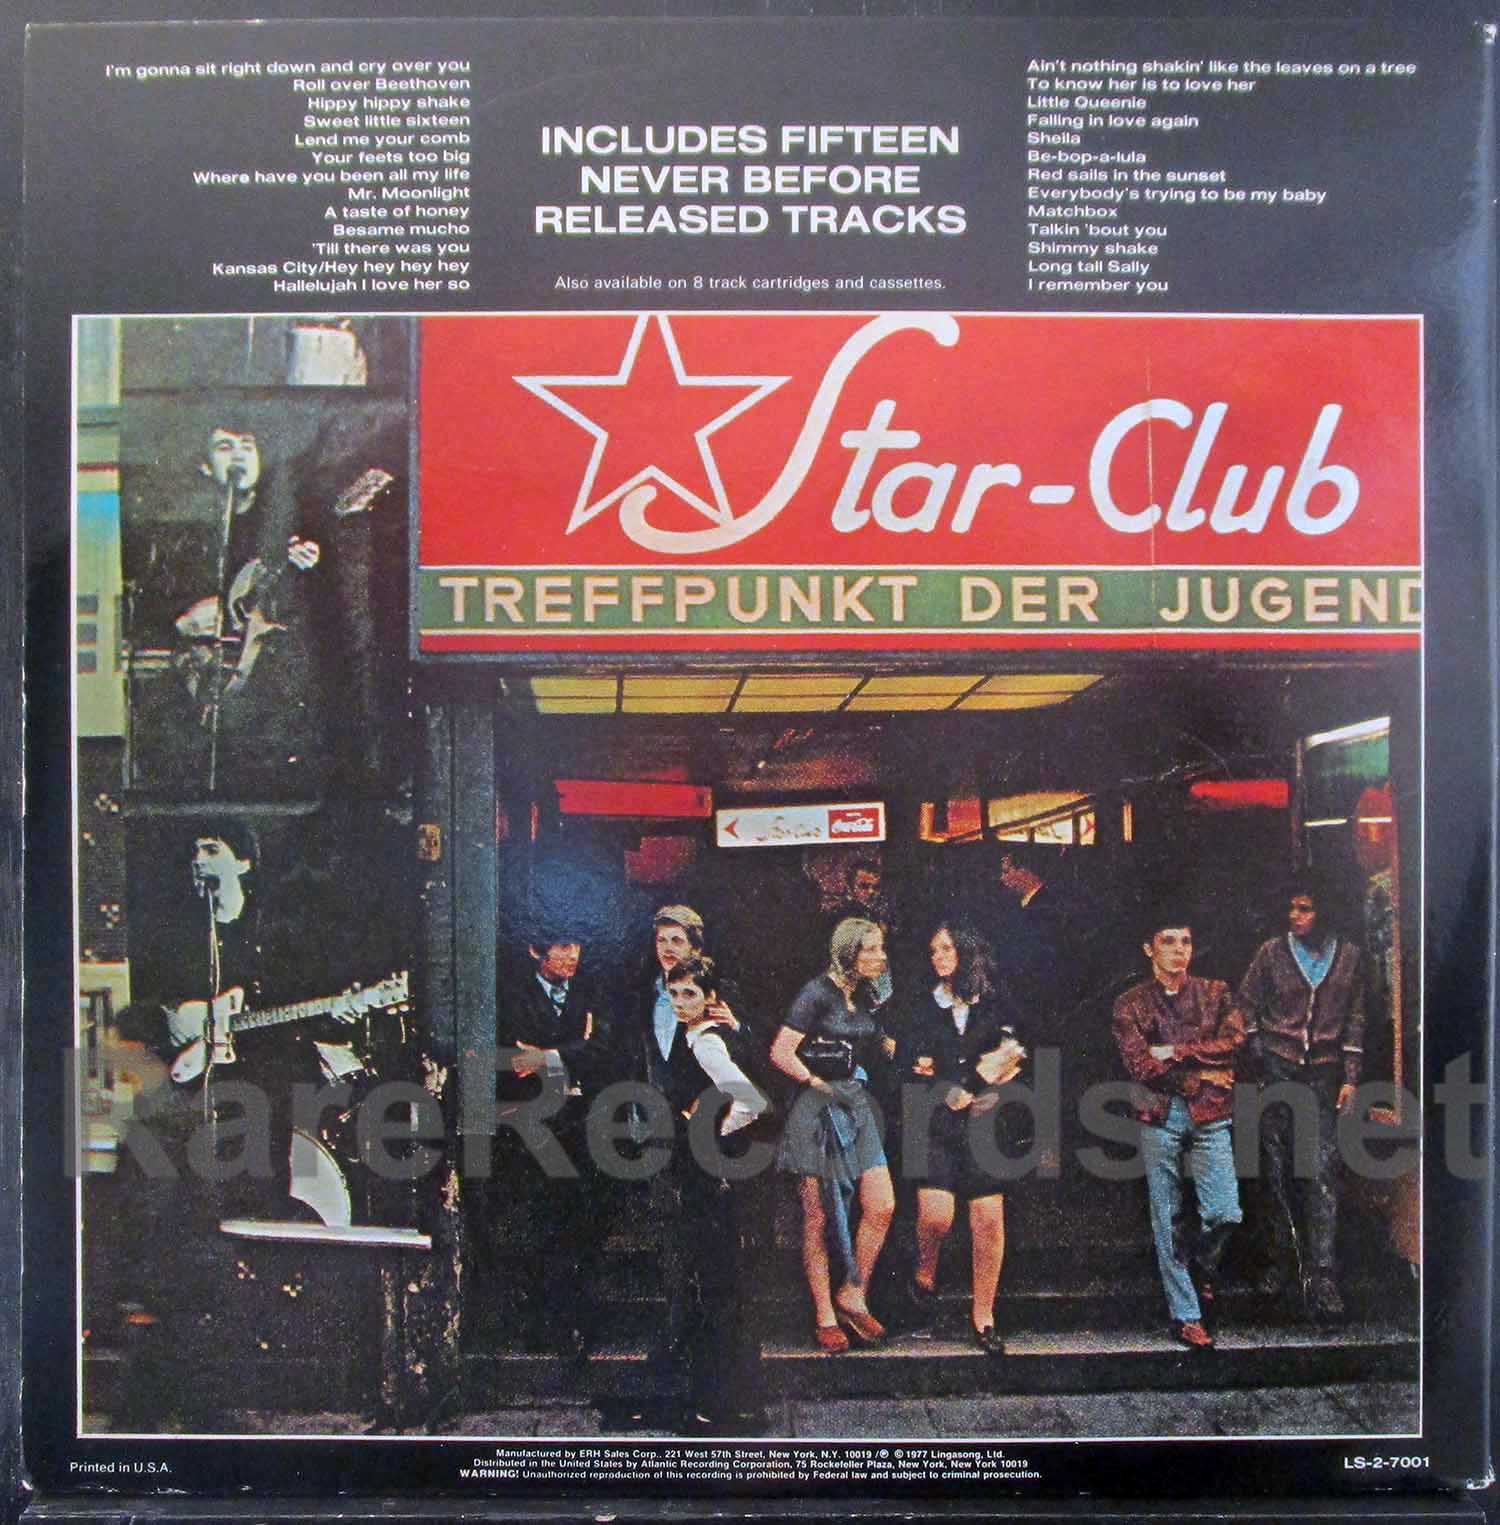 Beatles – Live at the Star Club . red vinyl promotional 2 LP set